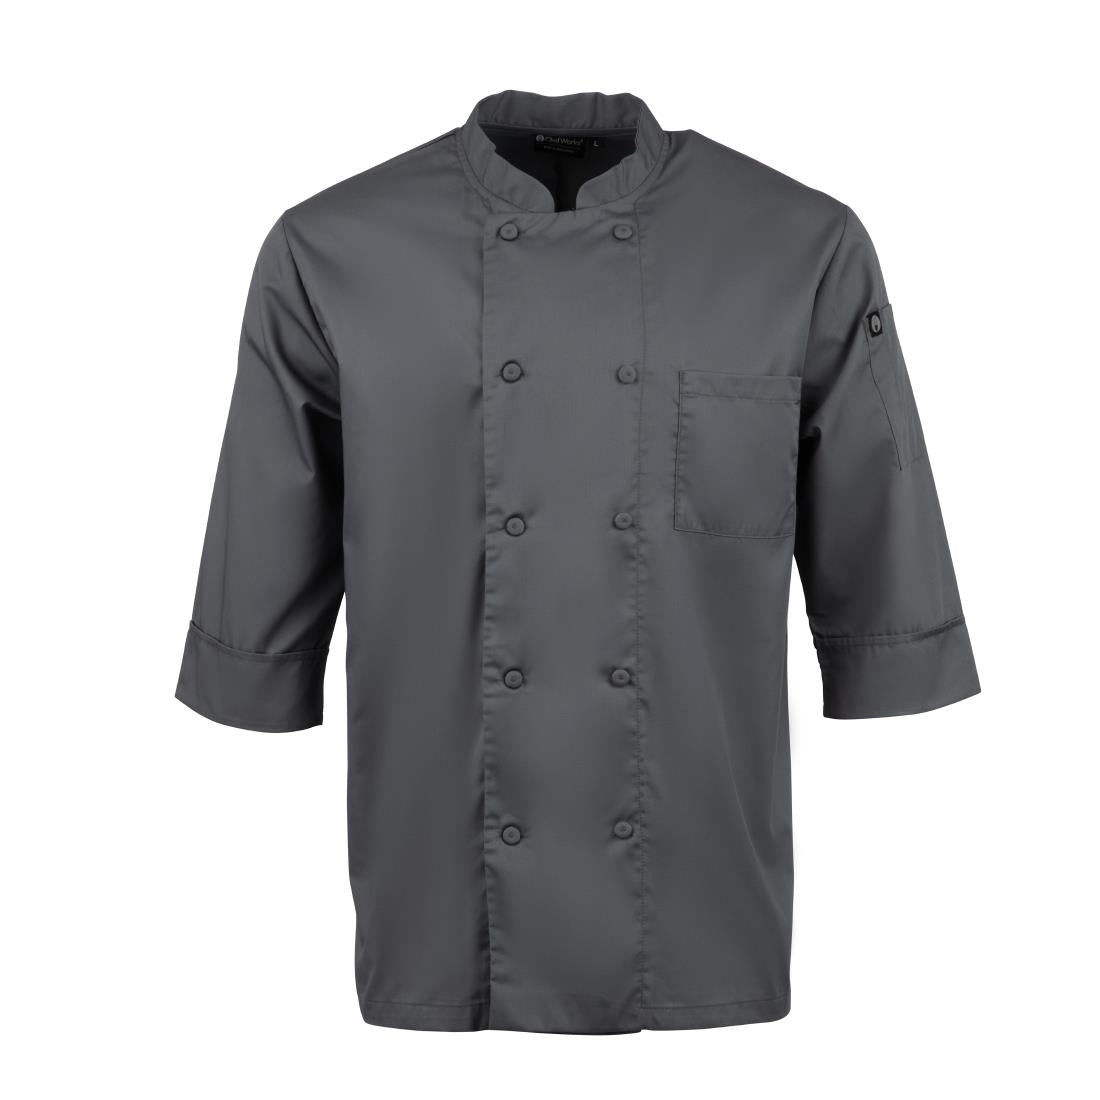 A934-M Chef Works Unisex Chefs Jacket Grey M JD Catering Equipment Solutions Ltd